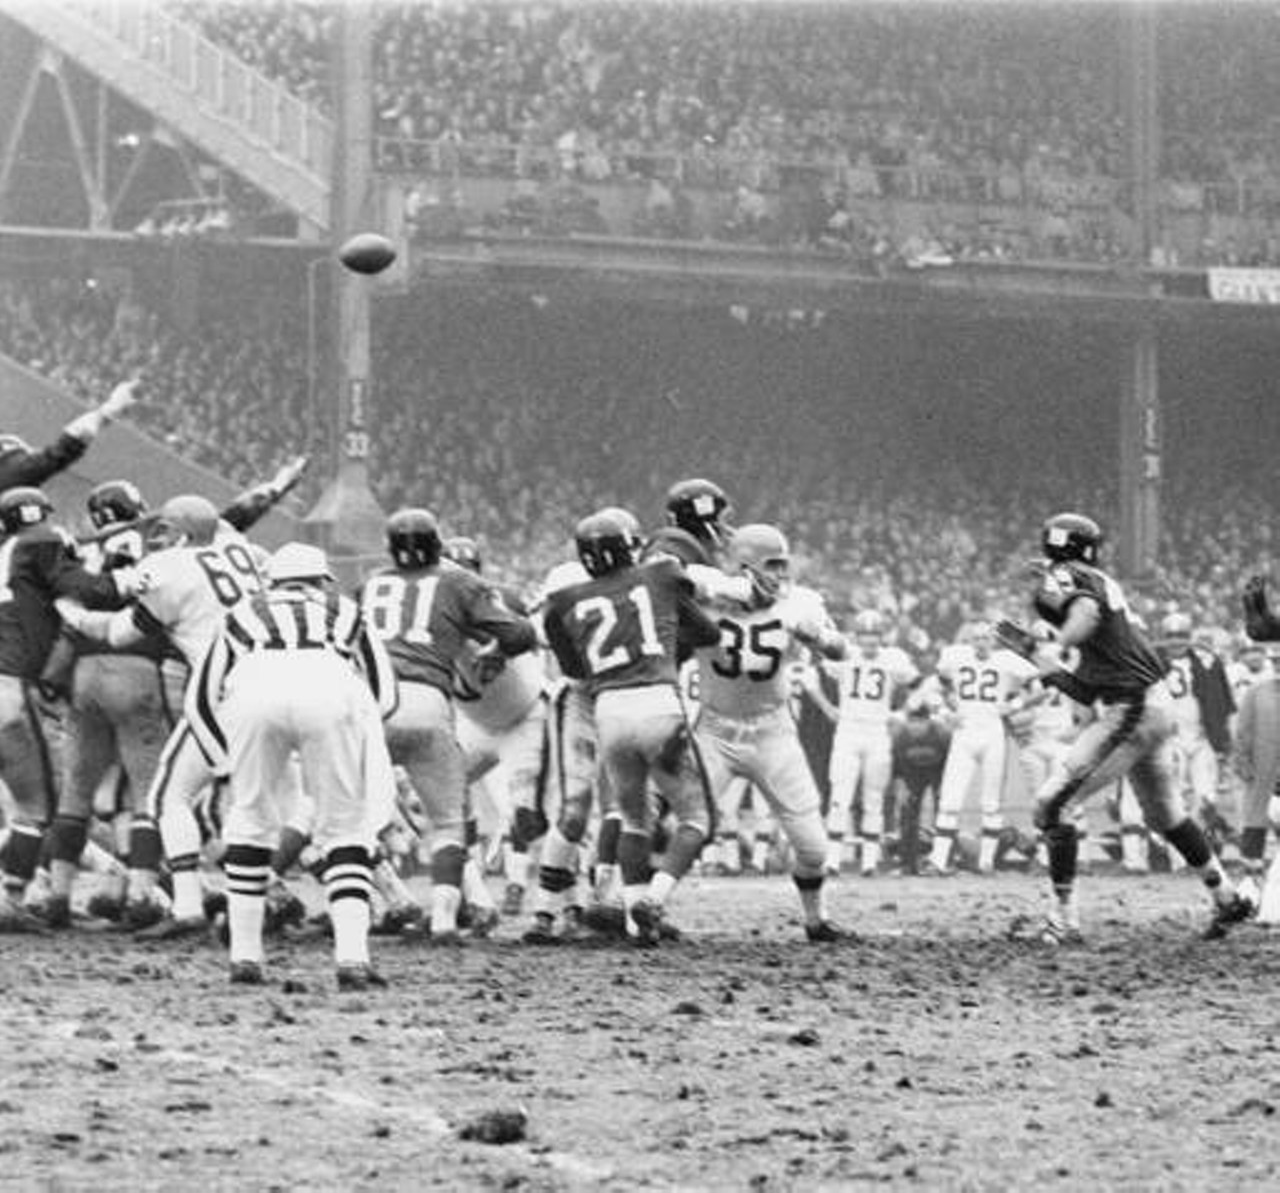 New York Giants try to block a 39-yard field goal by Cleveland's Lou Groza during the first period on Dec. 12, 1964. Browns led at halftime in the crucial game 24-7.